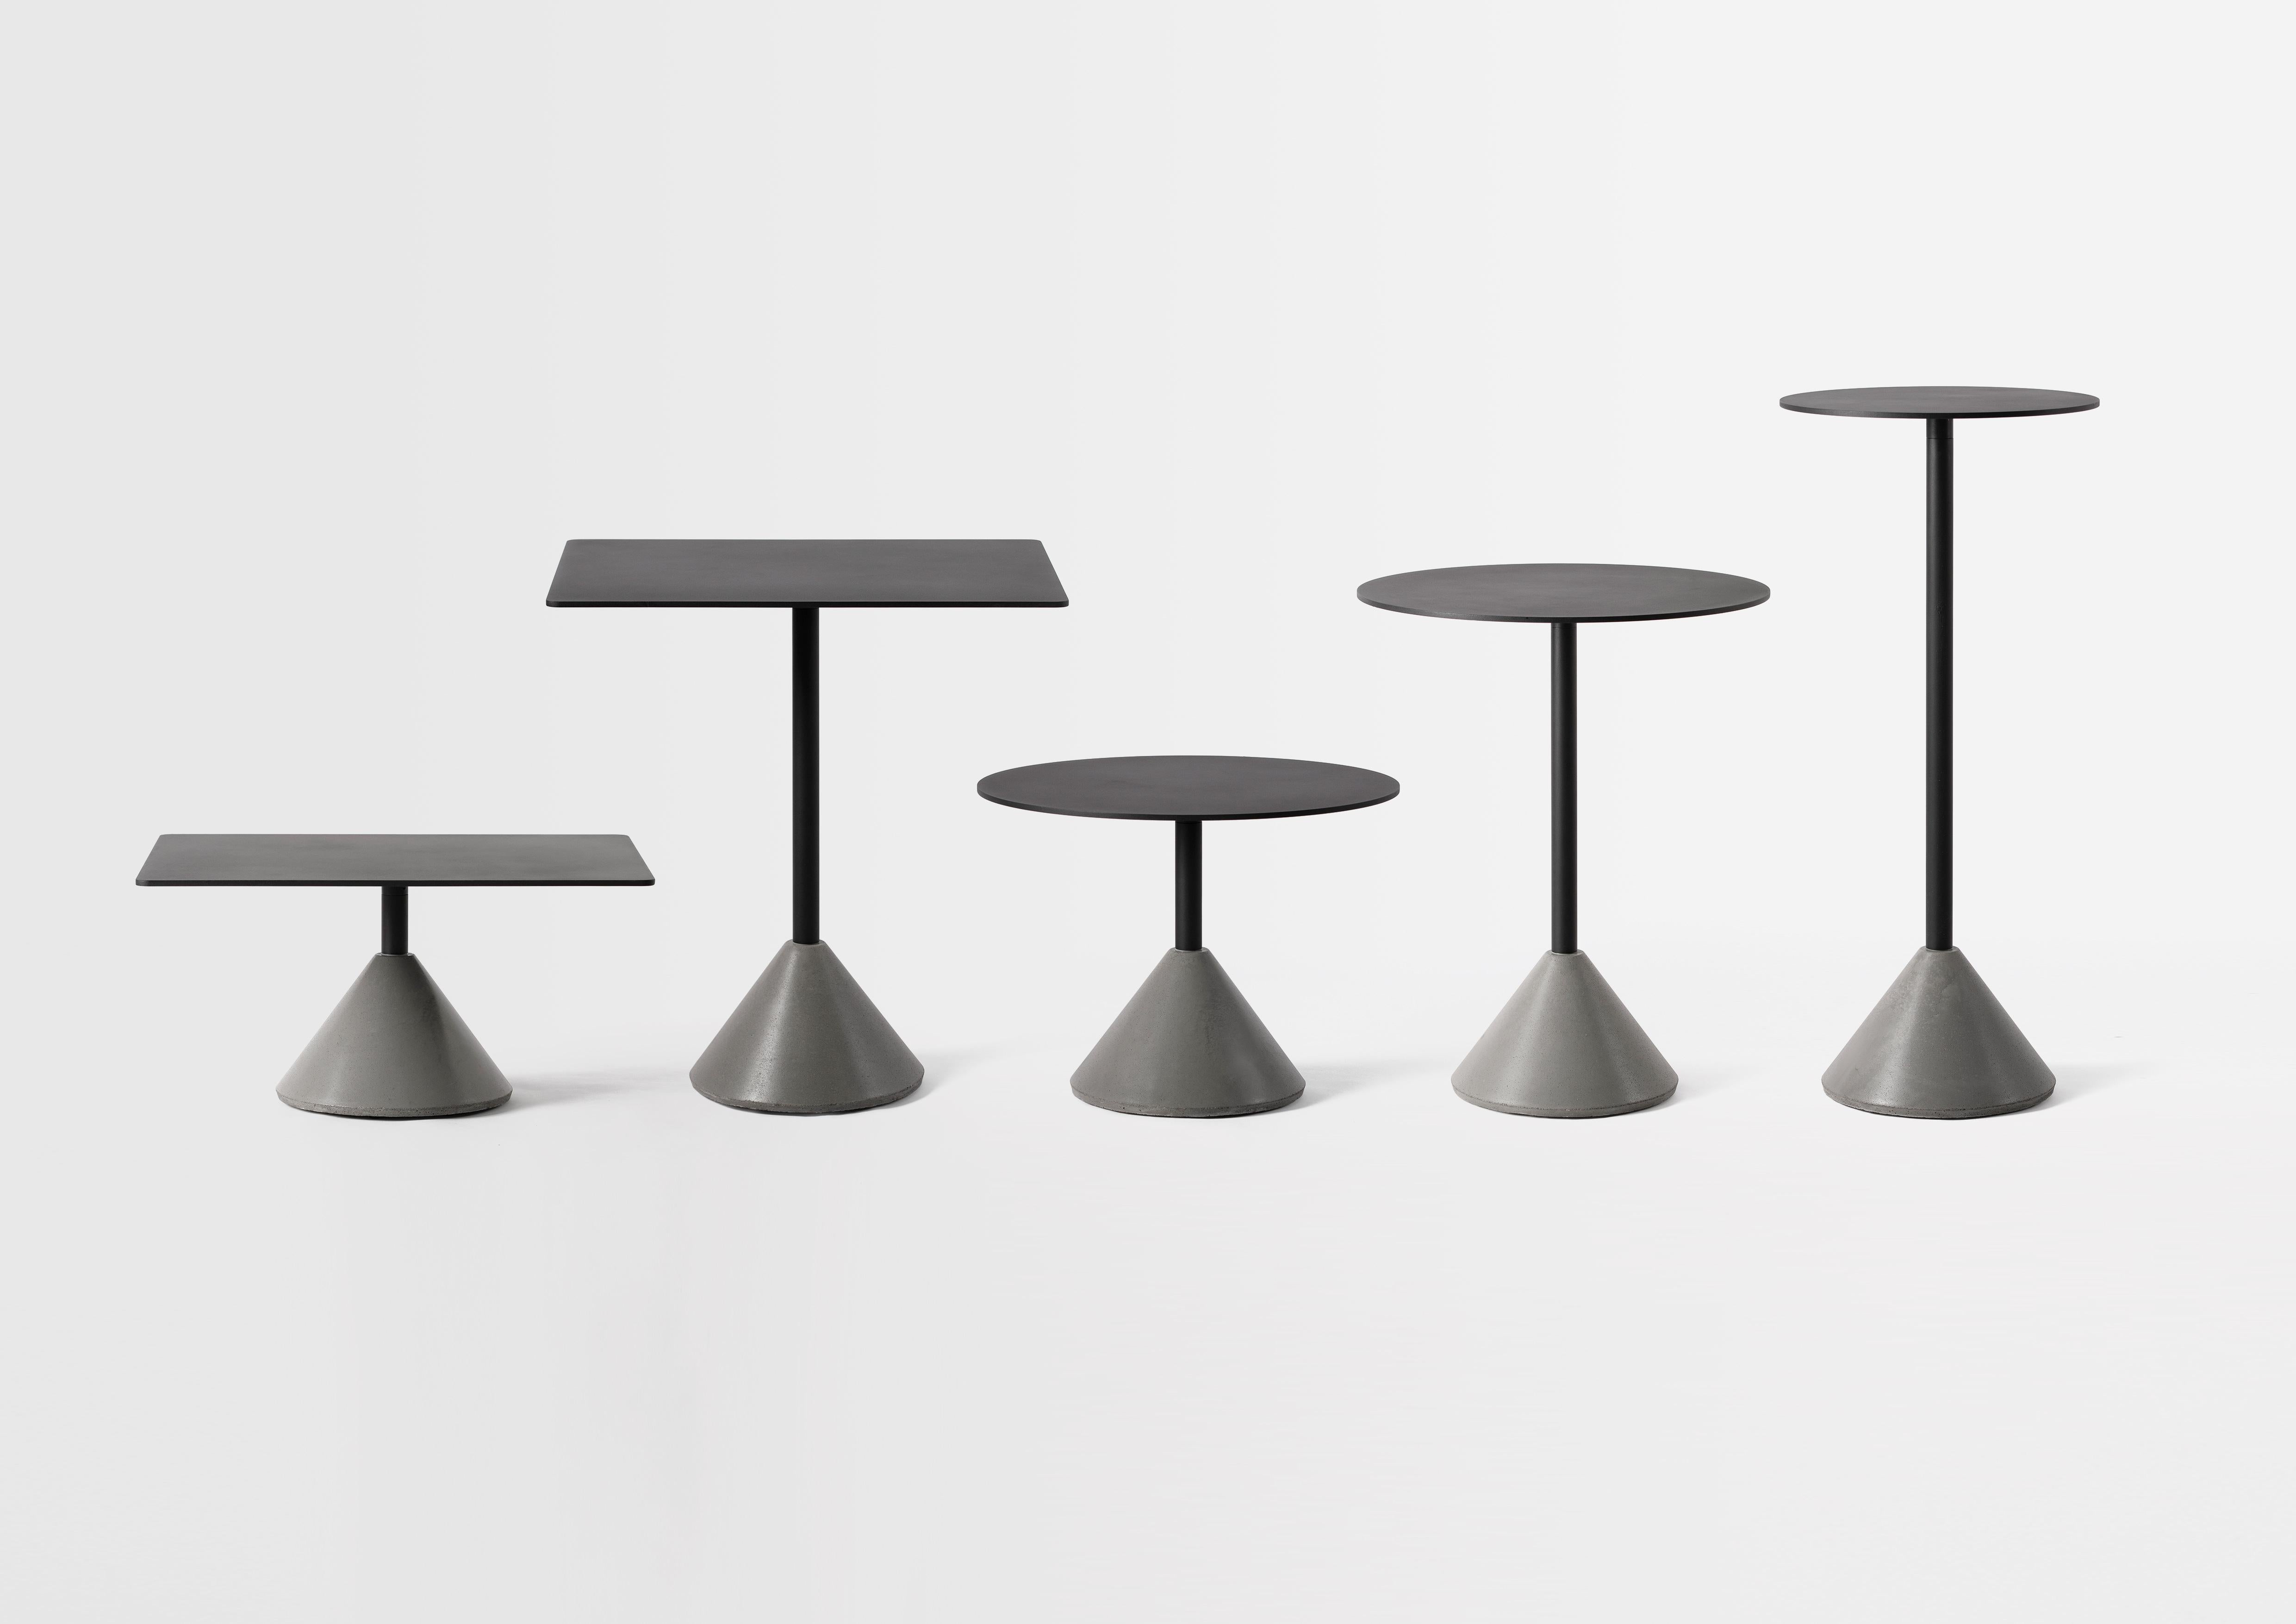 Material: Concrete, Aluminum, Demolition Leftover Concrete
Size: 600 x 600 x H450 mm
Weight: 25 kg
Color: Cement Grey
Tabletop Color: Black

About the Artist/ Designer:
Bentu's furniture derives its uniqueness from the simplicity of its forms